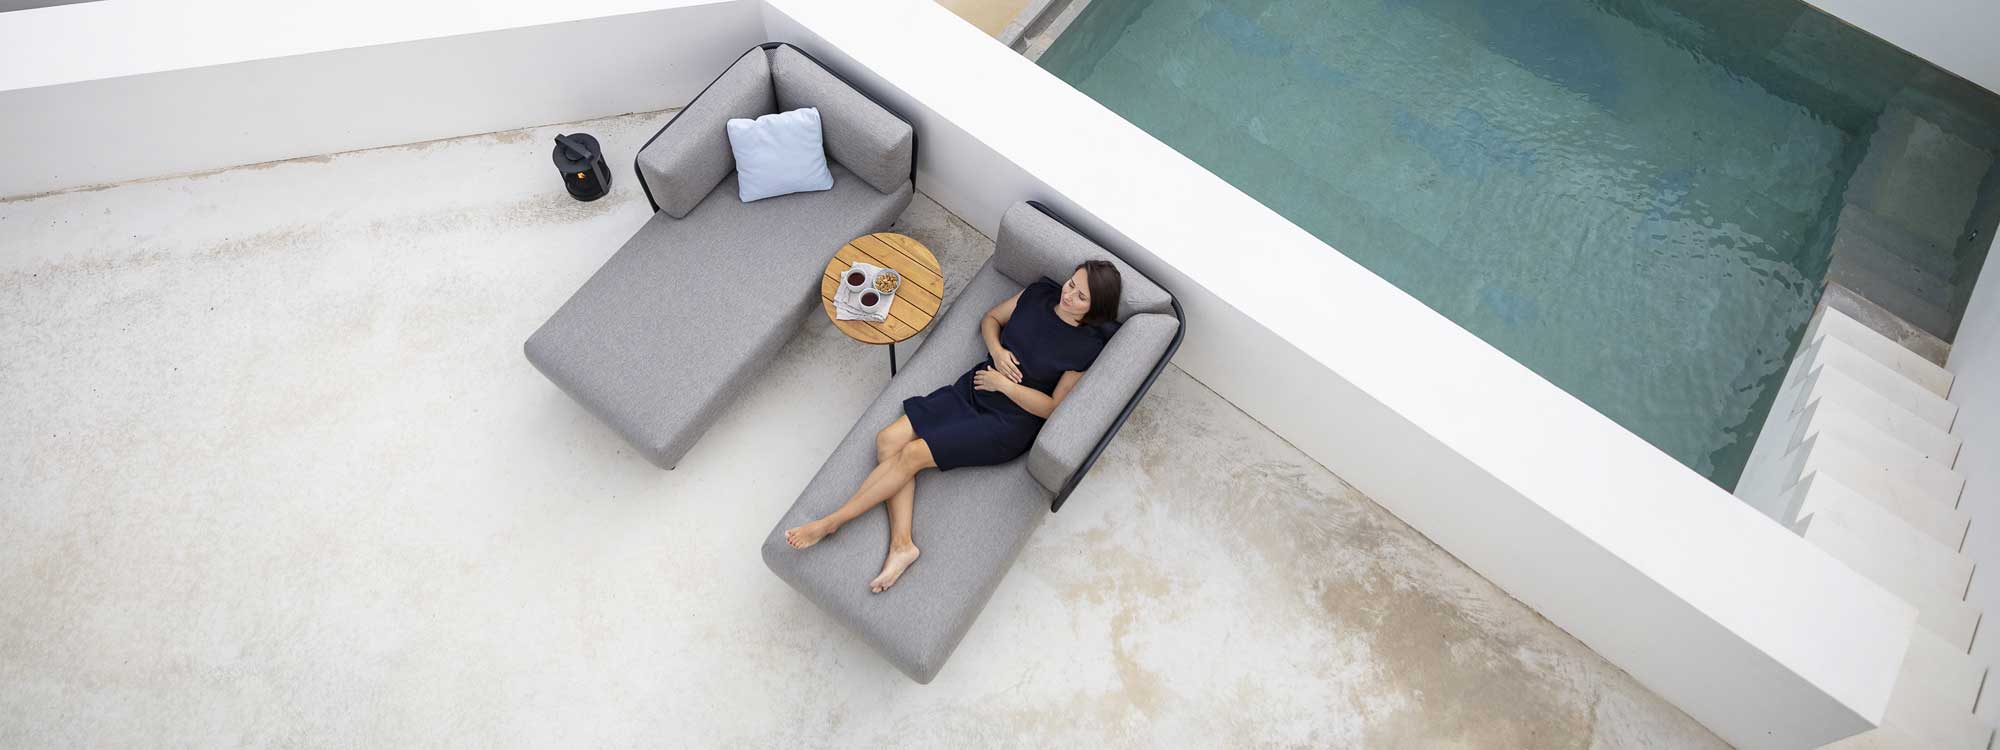 Birdseye view of woman reclining on Baza outdoor chaise longue